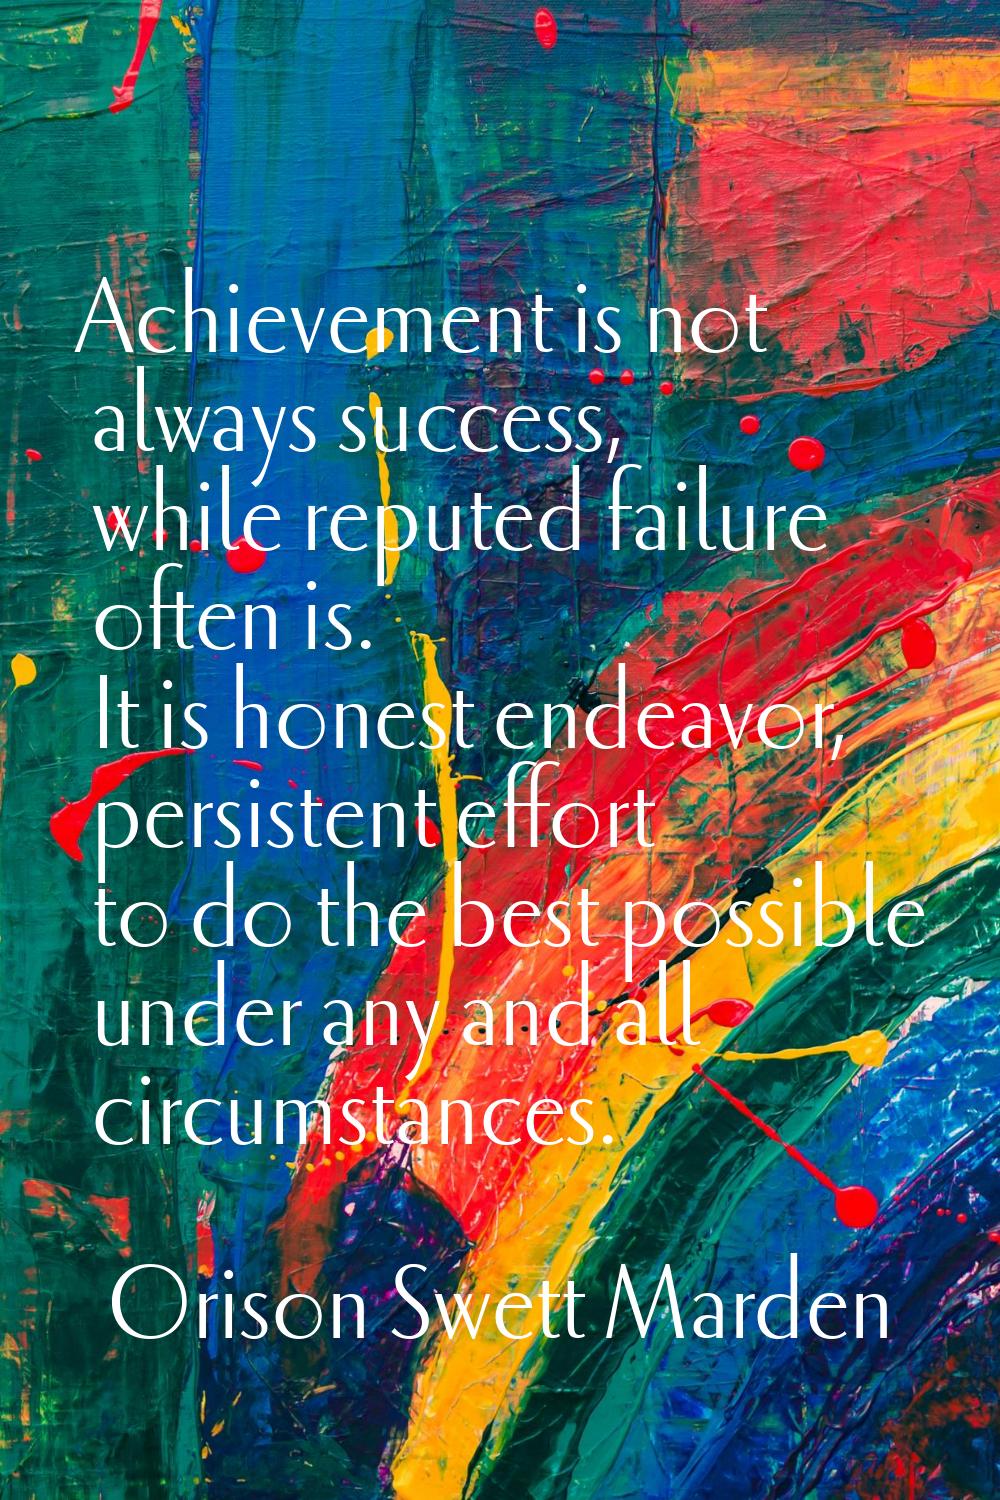 Achievement is not always success, while reputed failure often is. It is honest endeavor, persisten